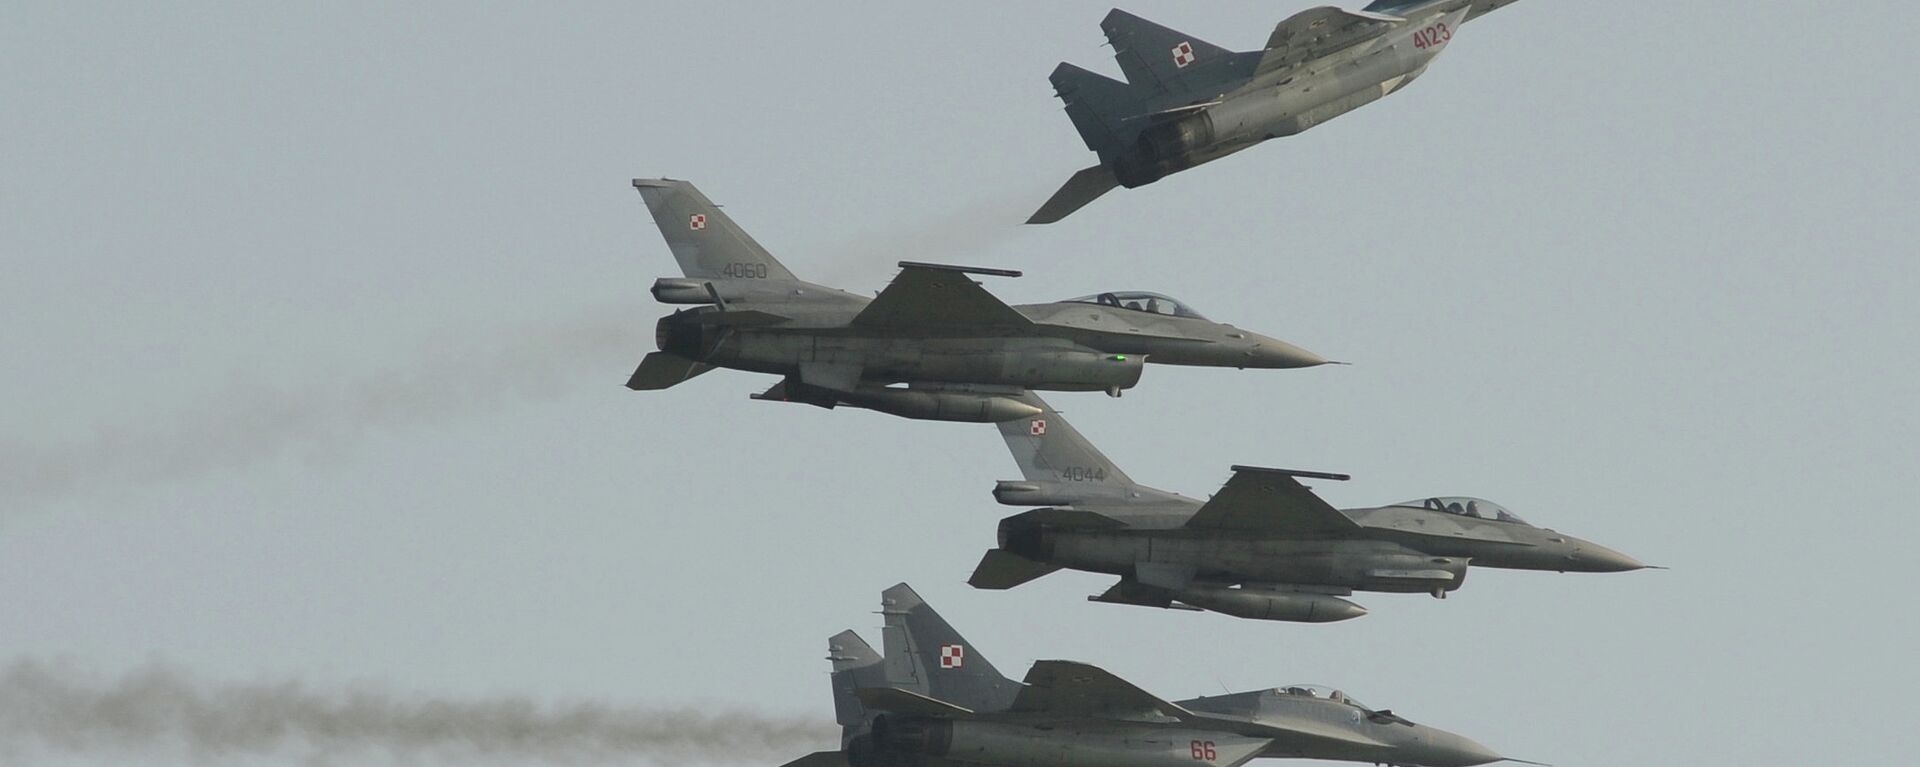 Two Polish Air Force Russian made Mig 29's fly above and below two Polish Air Force U.S. made F-16's fighter jets during the Air Show in Radom, Poland, Saturday, Aug. 27, 2011 - Sputnik International, 1920, 08.03.2022